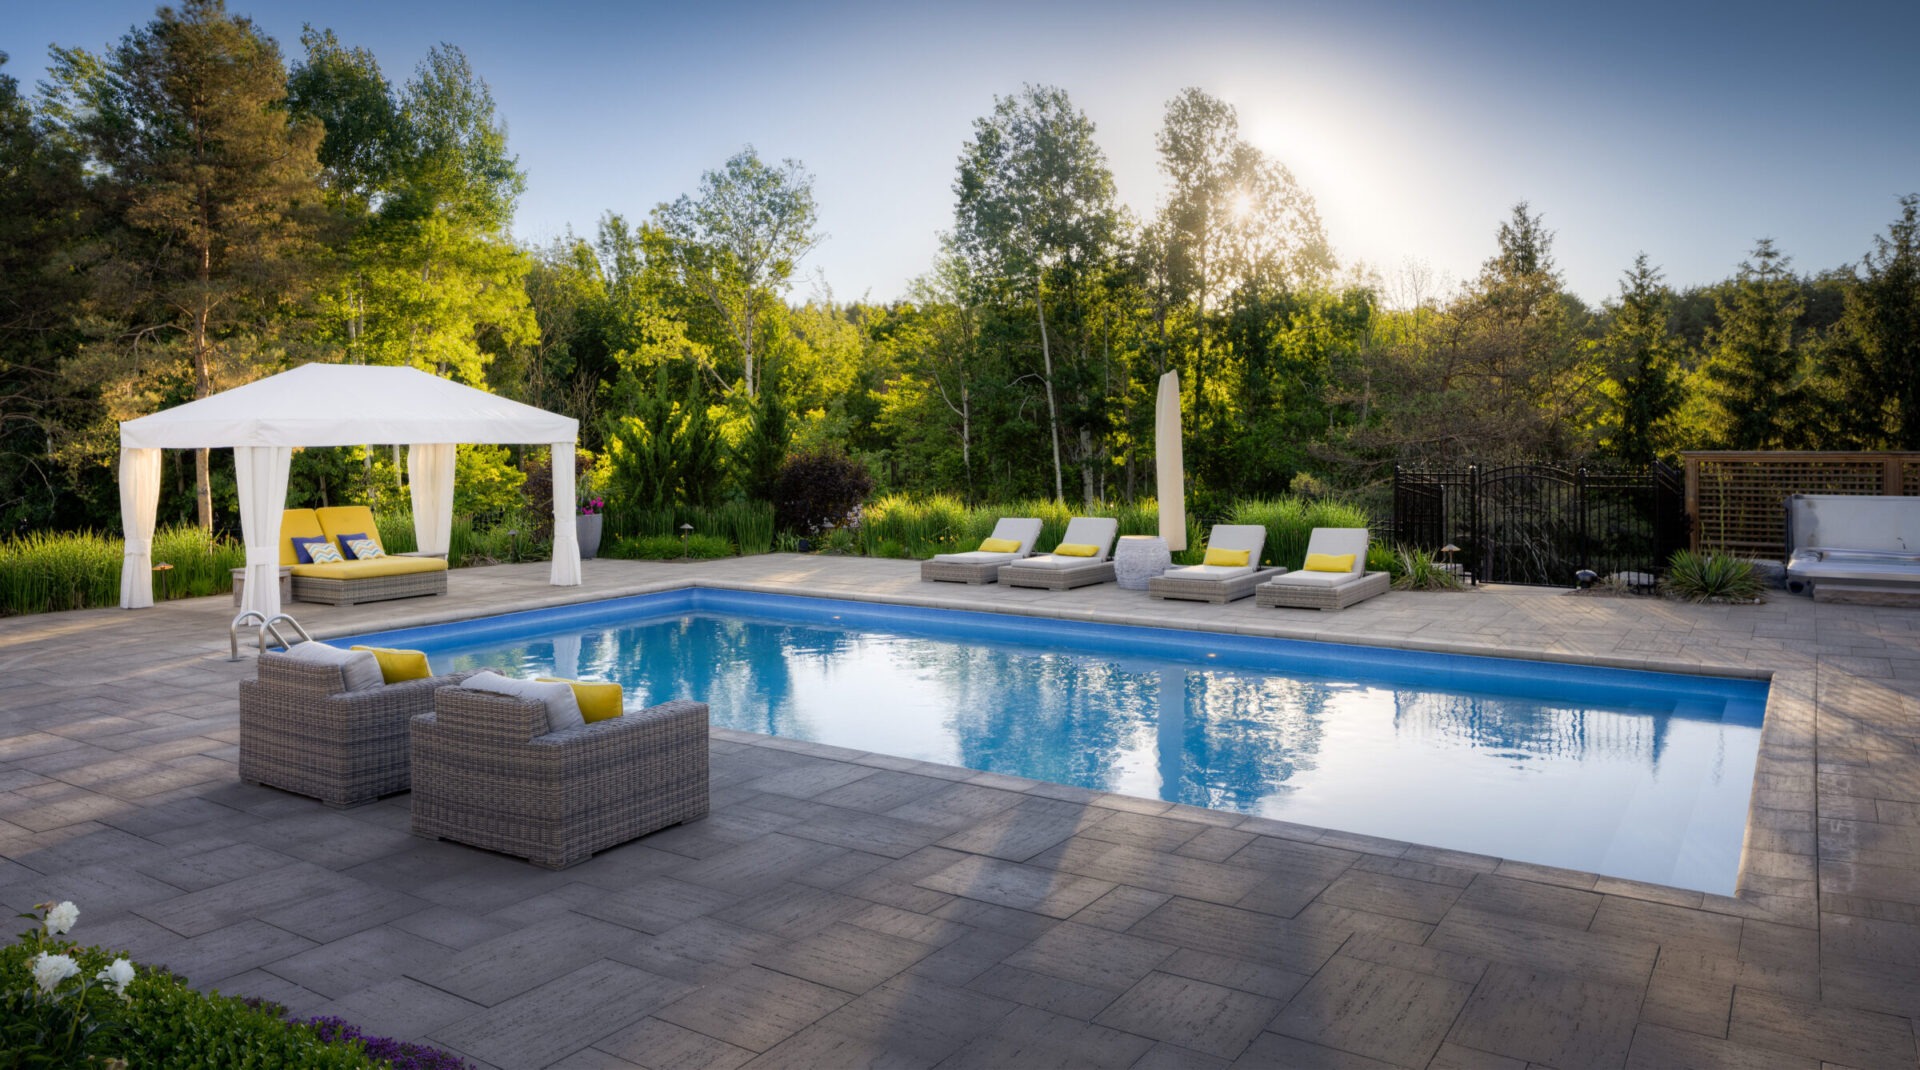 An elegant outdoor swimming pool with loungers and a gazebo, surrounded by lush greenery and trees, reflecting a serene, sunlit sky.